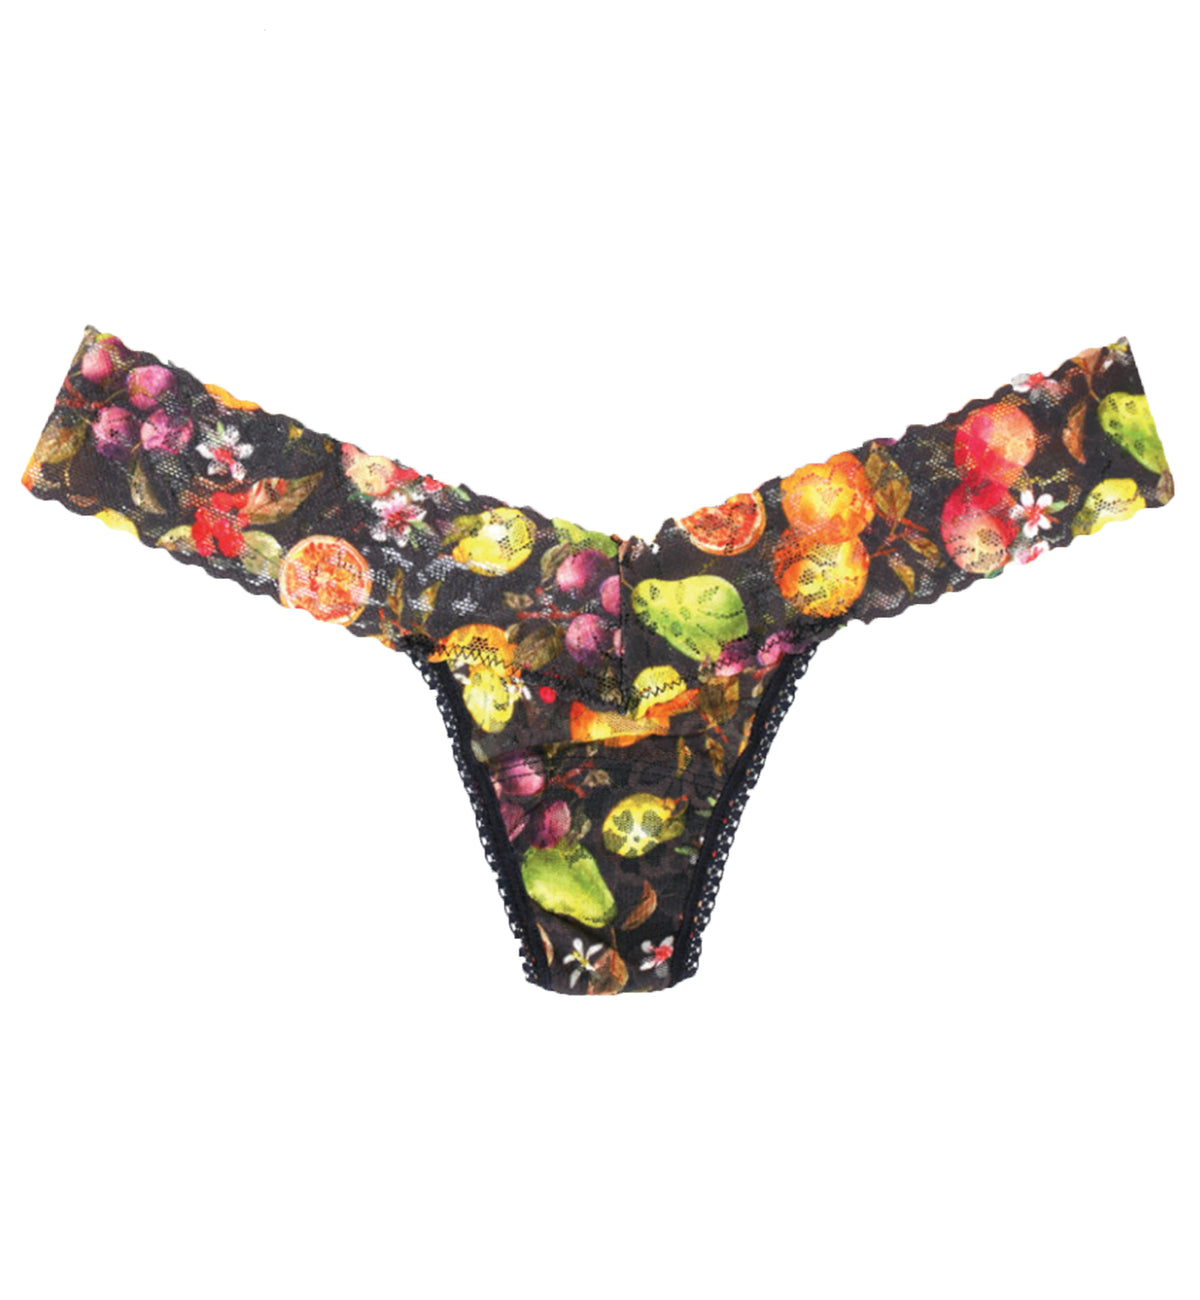 Hanky Panky Signature Lace Printed Low Rise Thong (PR4911P),Picnic for One - Picnic for One,One Size